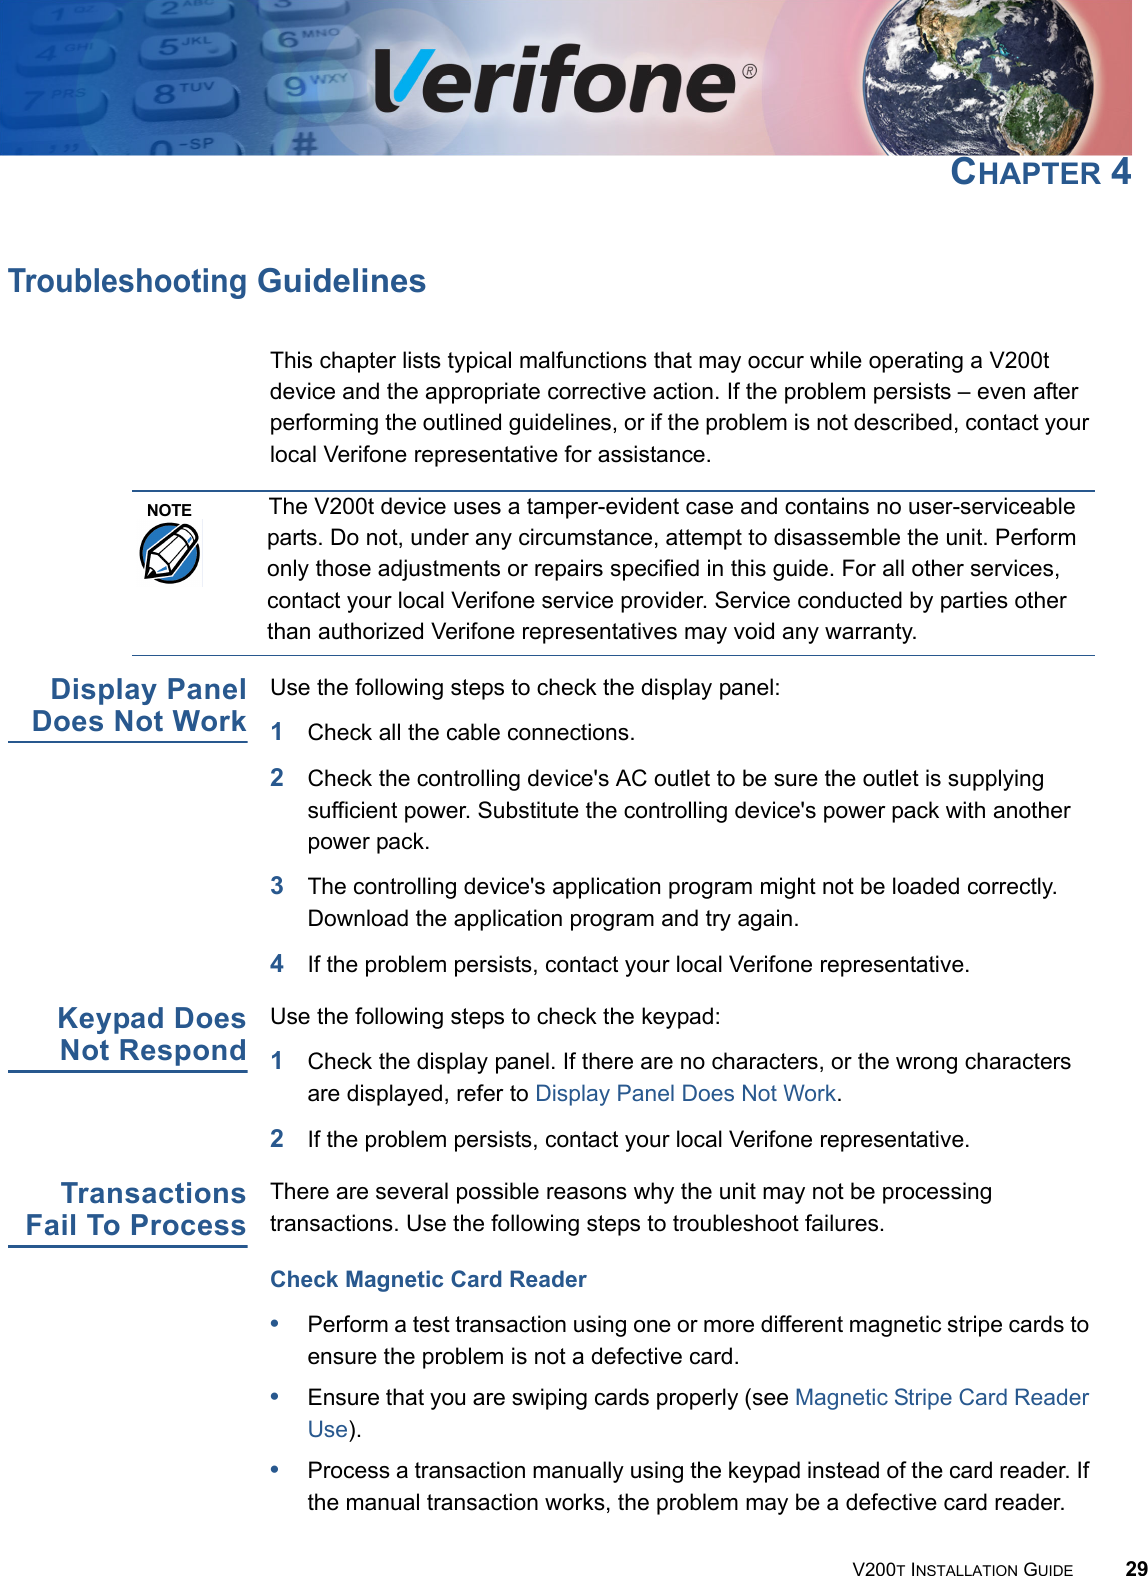 V200T INSTALLATION GUIDE 29CHAPTER 4Troubleshooting GuidelinesThis chapter lists typical malfunctions that may occur while operating a V200t device and the appropriate corrective action. If the problem persists – even after performing the outlined guidelines, or if the problem is not described, contact your local Verifone representative for assistance.Display PanelDoes Not WorkUse the following steps to check the display panel:1Check all the cable connections.2Check the controlling device&apos;s AC outlet to be sure the outlet is supplying sufficient power. Substitute the controlling device&apos;s power pack with another power pack.3The controlling device&apos;s application program might not be loaded correctly. Download the application program and try again.4If the problem persists, contact your local Verifone representative.Keypad DoesNot RespondUse the following steps to check the keypad:1Check the display panel. If there are no characters, or the wrong characters are displayed, refer to Display Panel Does Not Work.2If the problem persists, contact your local Verifone representative.TransactionsFail To ProcessThere are several possible reasons why the unit may not be processing transactions. Use the following steps to troubleshoot failures.Check Magnetic Card Reader•Perform a test transaction using one or more different magnetic stripe cards to ensure the problem is not a defective card.•Ensure that you are swiping cards properly (see Magnetic Stripe Card Reader Use).•Process a transaction manually using the keypad instead of the card reader. If the manual transaction works, the problem may be a defective card reader.NOTEThe V200t device uses a tamper-evident case and contains no user-serviceable parts. Do not, under any circumstance, attempt to disassemble the unit. Perform only those adjustments or repairs specified in this guide. For all other services, contact your local Verifone service provider. Service conducted by parties other than authorized Verifone representatives may void any warranty.